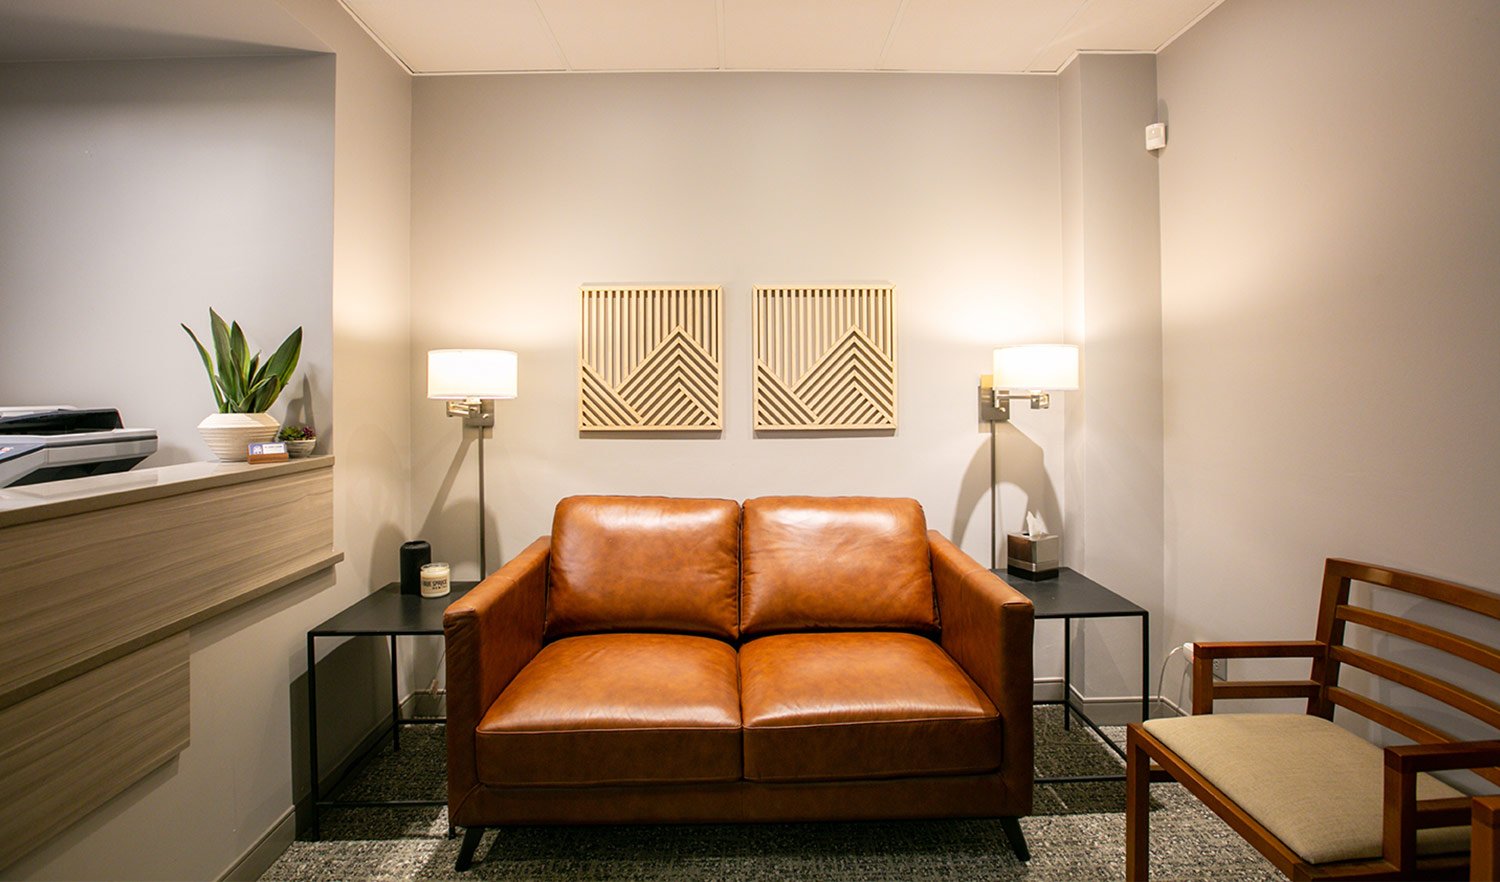 Dentist waiting area with leather couches | Blue Spruce Dental | Denver Dentist serving Glendale &amp; Cherry Creek